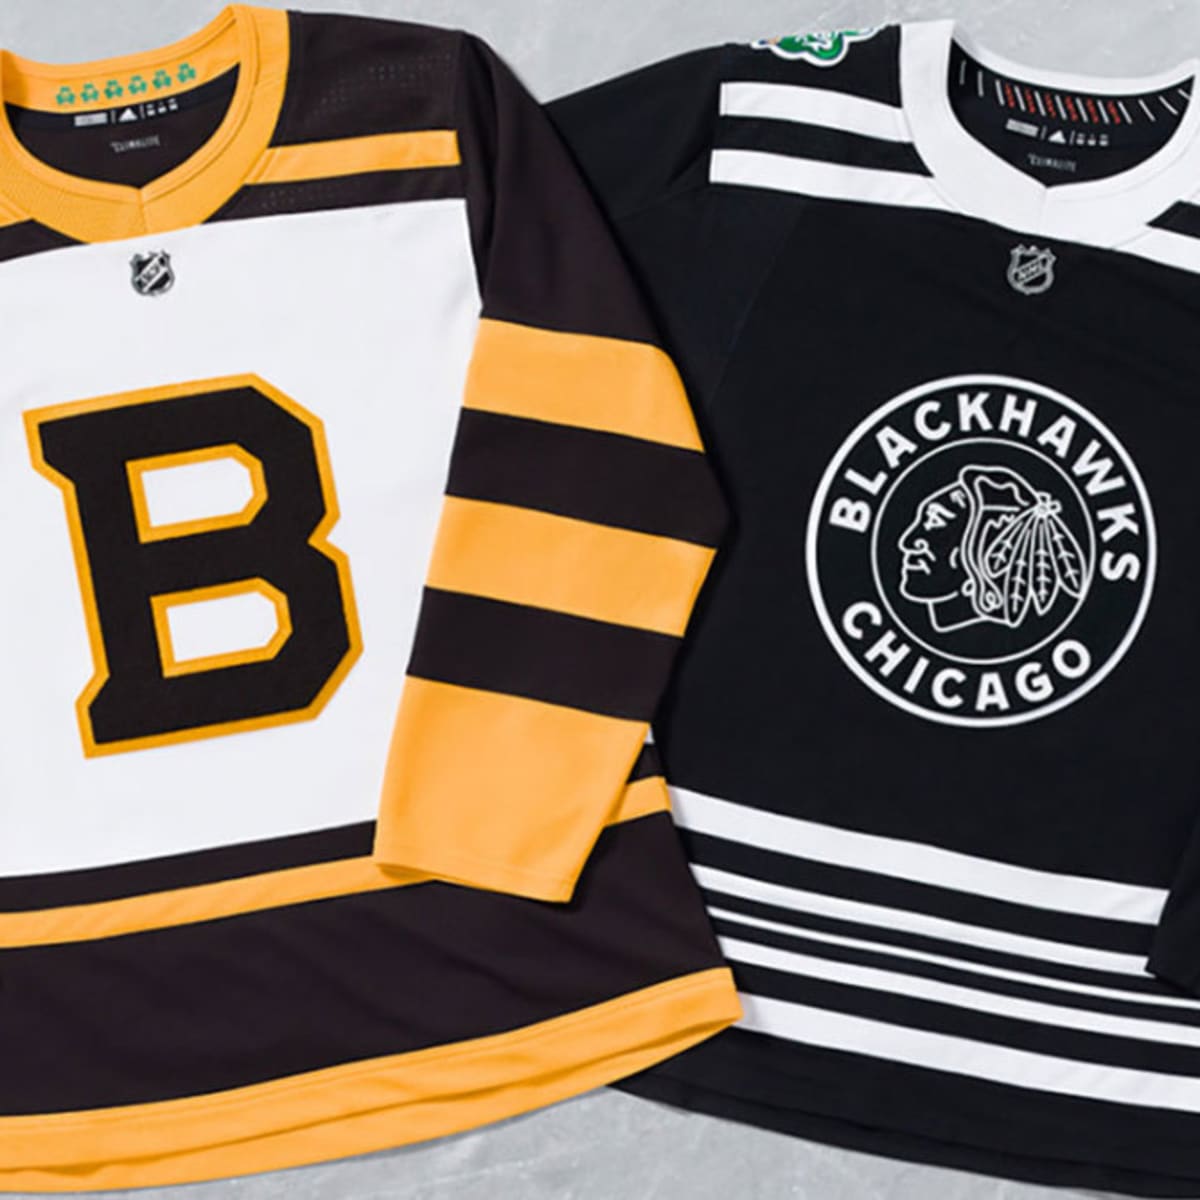 Canadiens unveil Winter Classic jersey